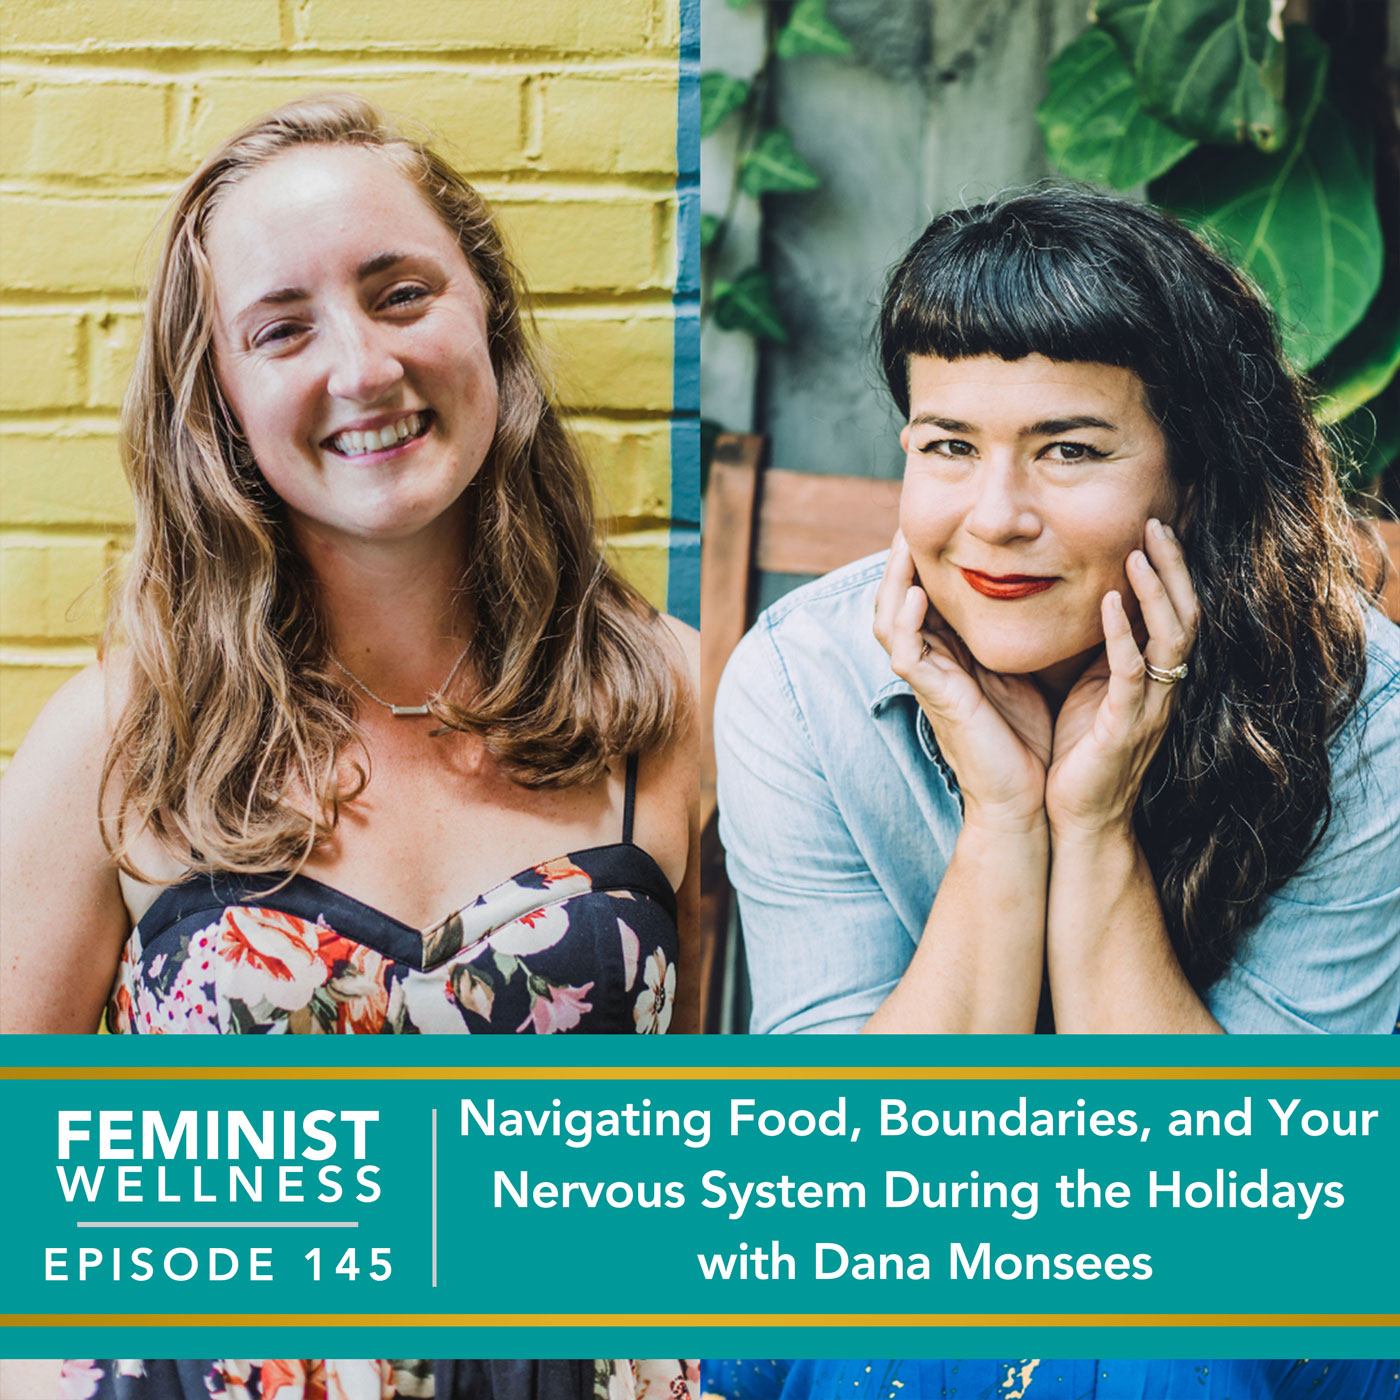 Feminist Wellness with Victoria Albina | Navigating Food, Boundaries, and Your Nervous System During the Holidays with Dana Monsees